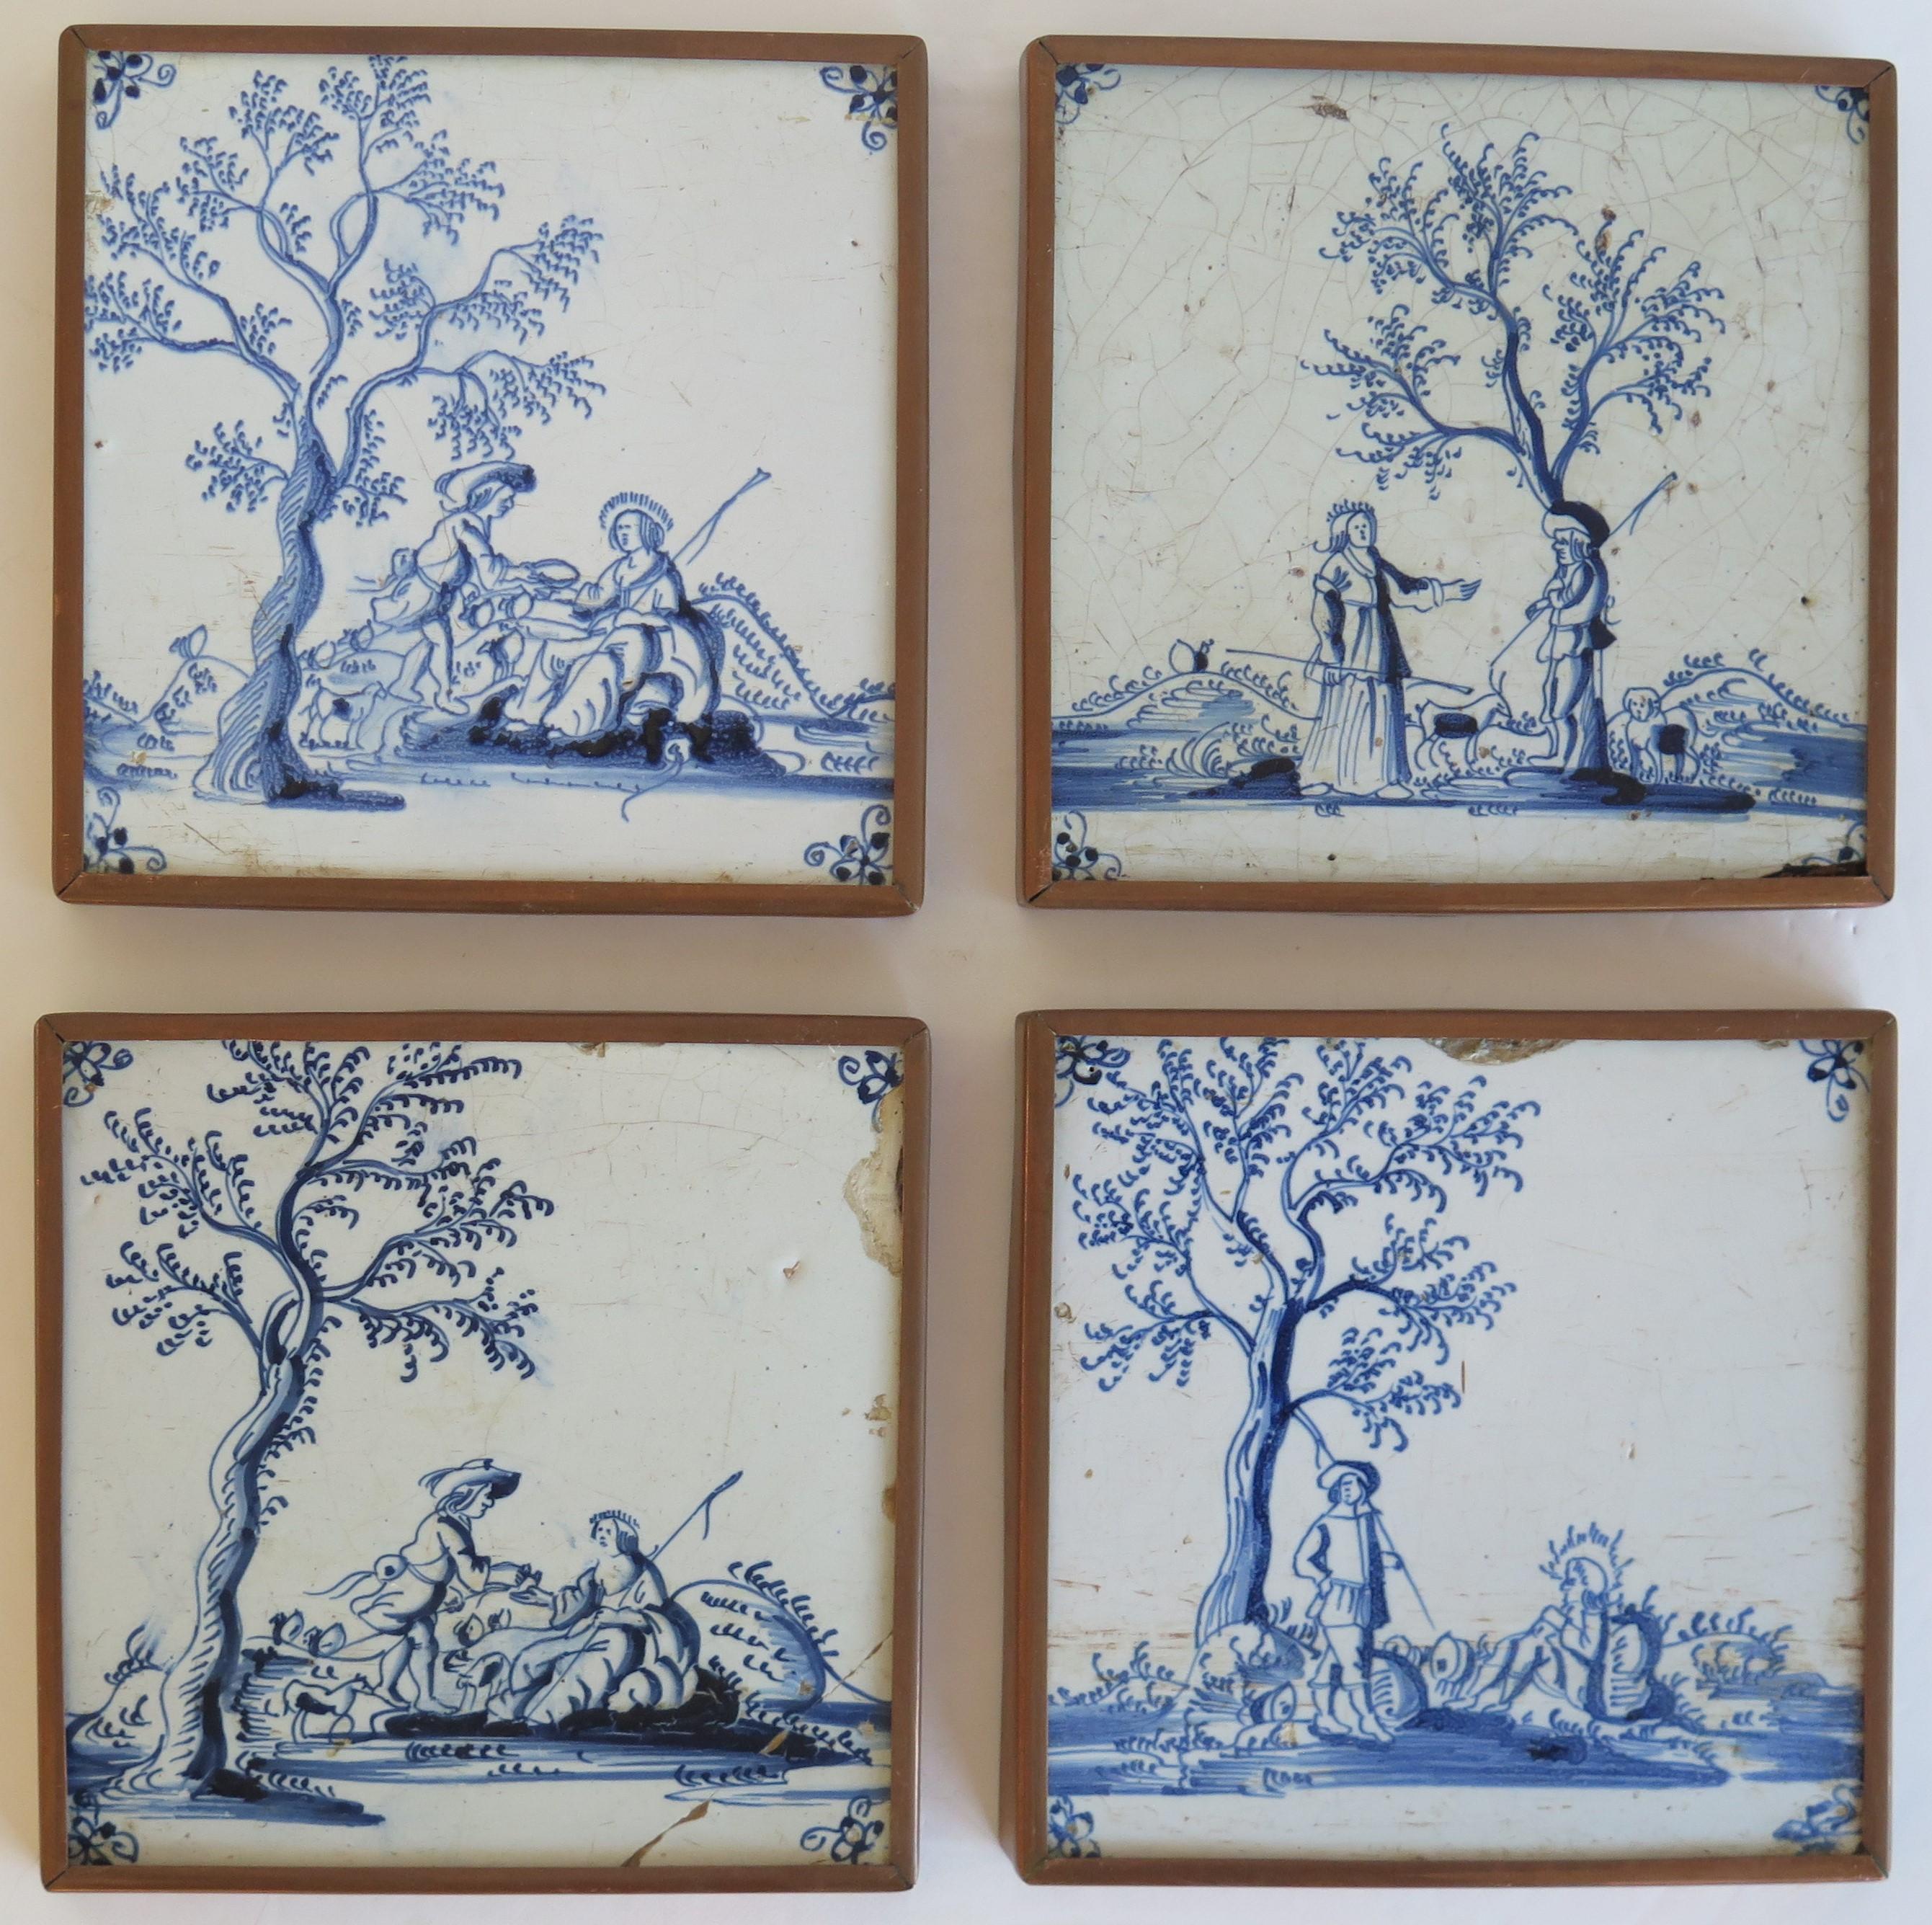 These are Four fine Delft ceramic wall tiles all with a blue and white hand painted similar pattern, made in the Netherlands during the late 17th / early 18th Century, circa 1700 and mounted in custom made copper frames all ready for